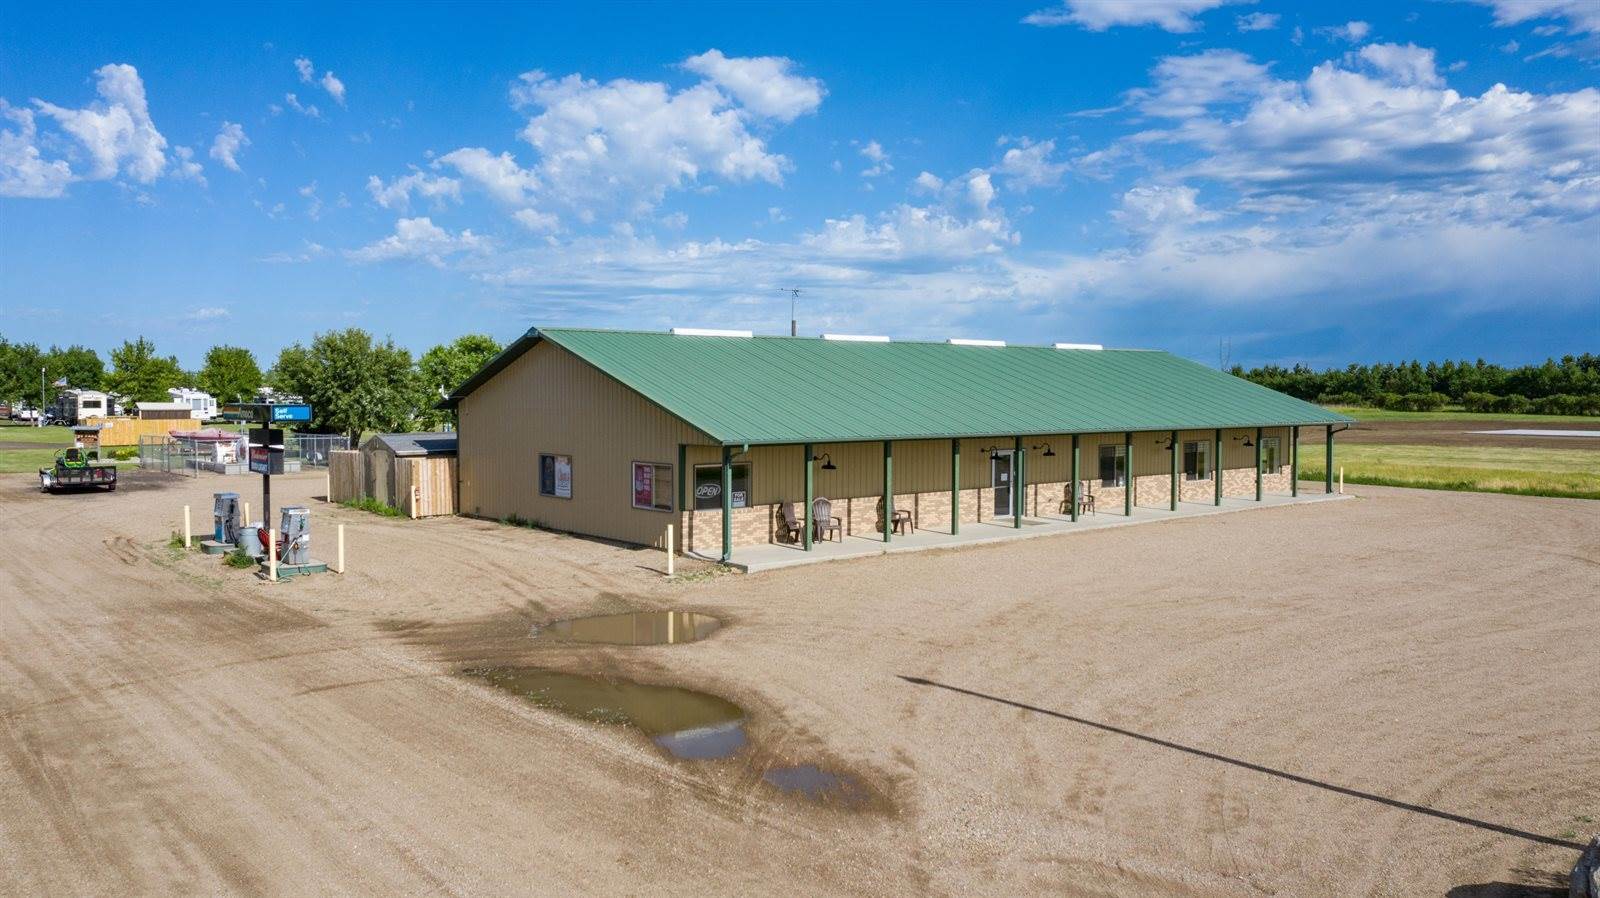 8049 Nd-1804 Highway, Linton, ND 58552